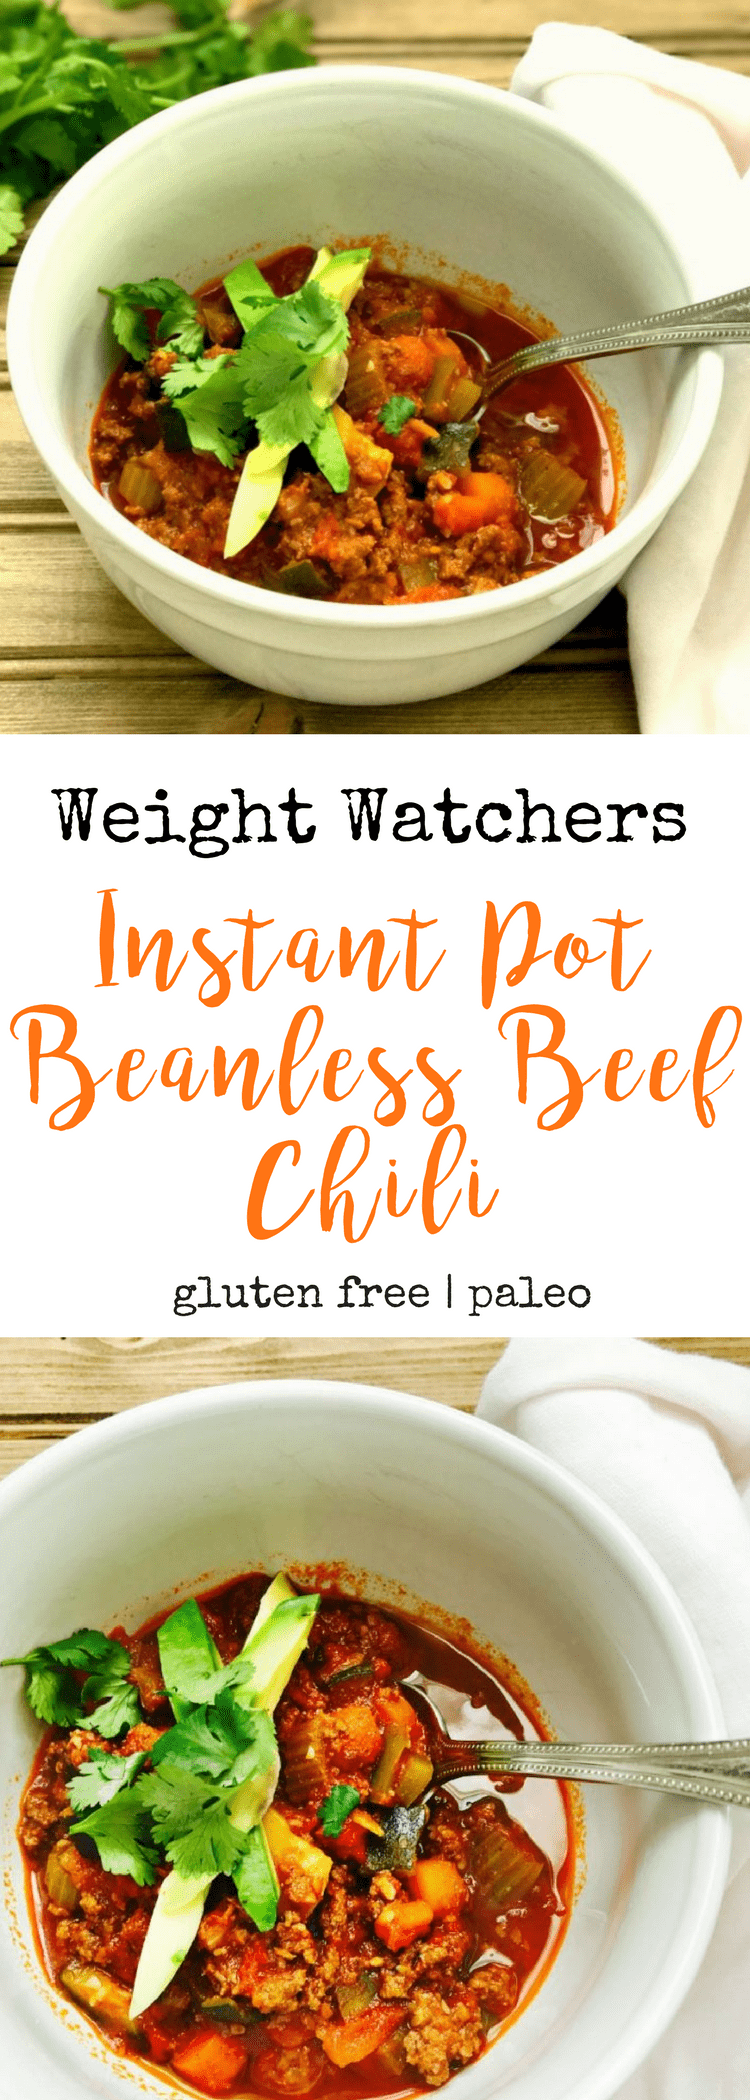 Weight Watchers Instant Pot Beanless Beef Chili | Confessions of a Fit Foodie